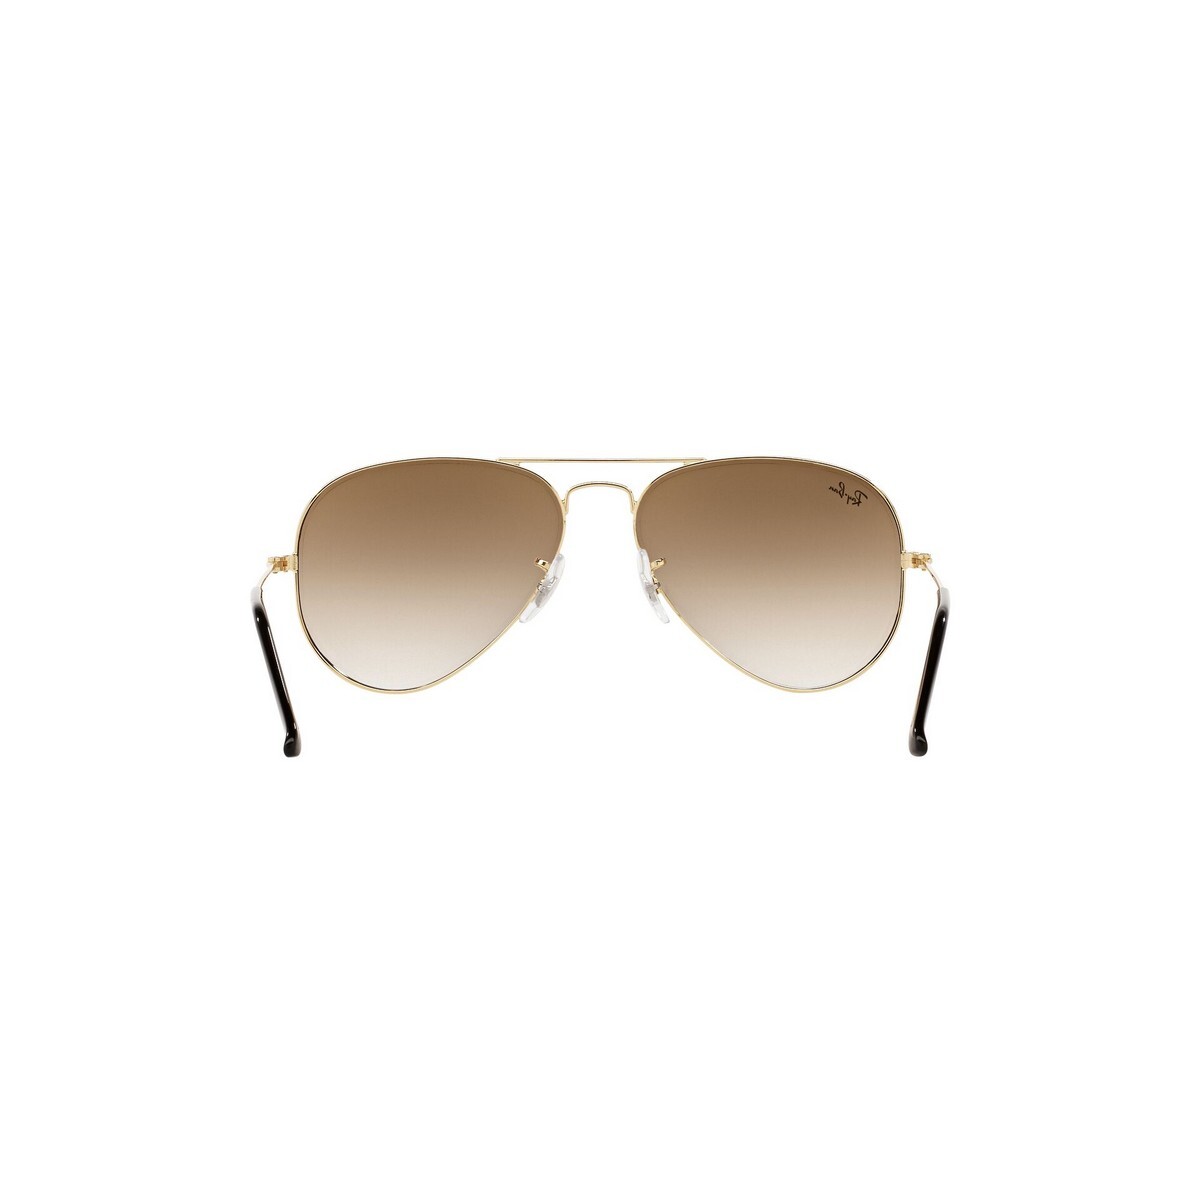 Rayban Unisex Arista Frame With Crystal Brown Gradient Lens Sunglass